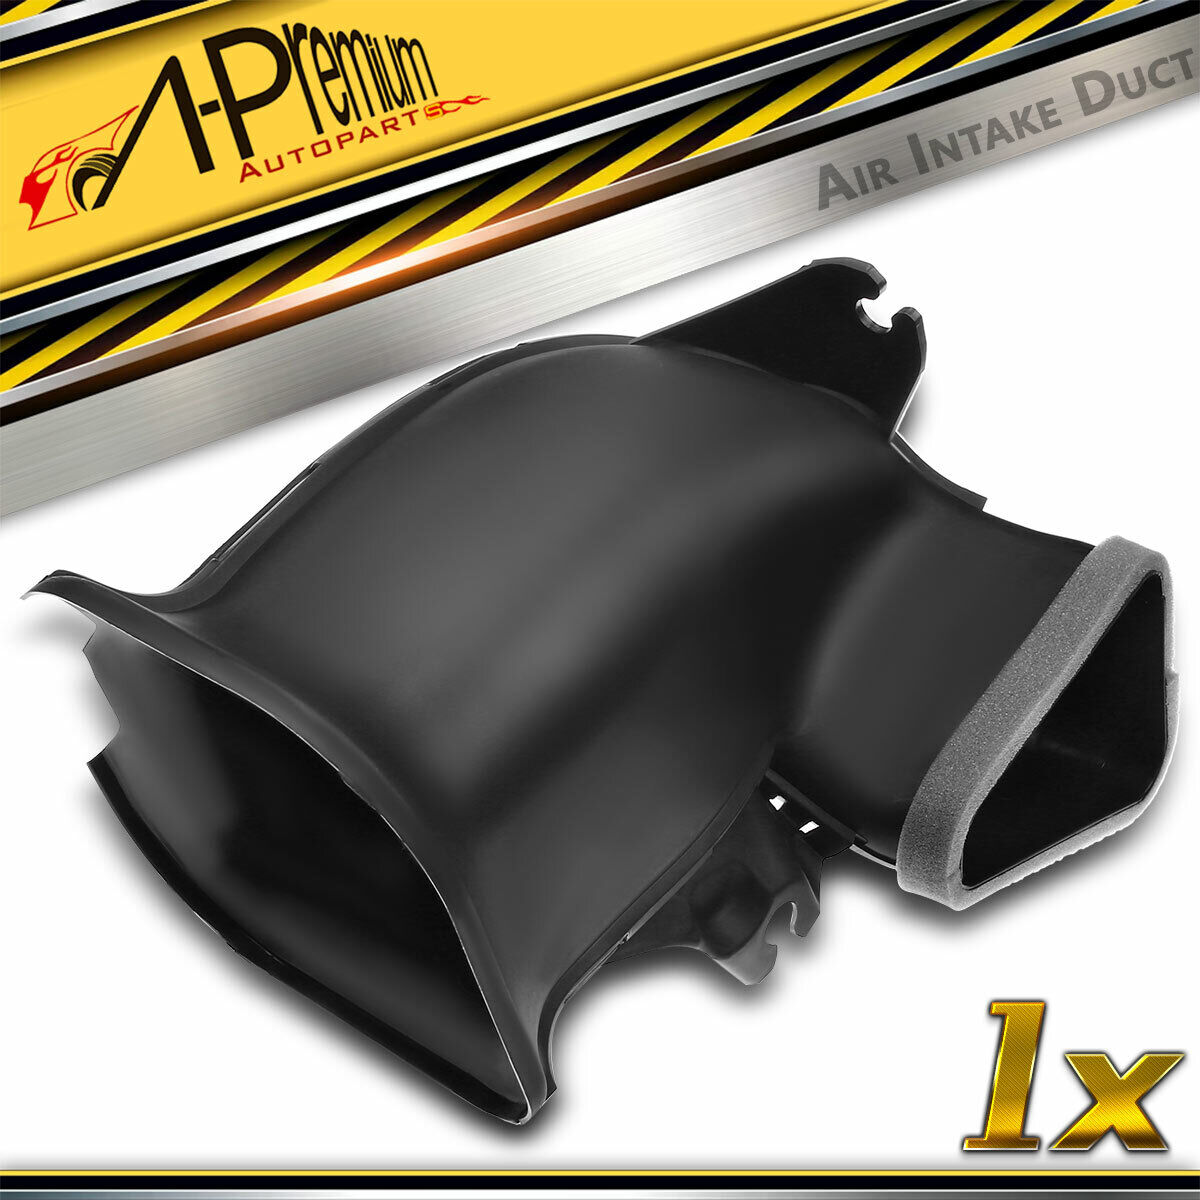 Air Intake Duct for Chrysler 300 2011-2020 Dodge Charger Challenger 2011-2019